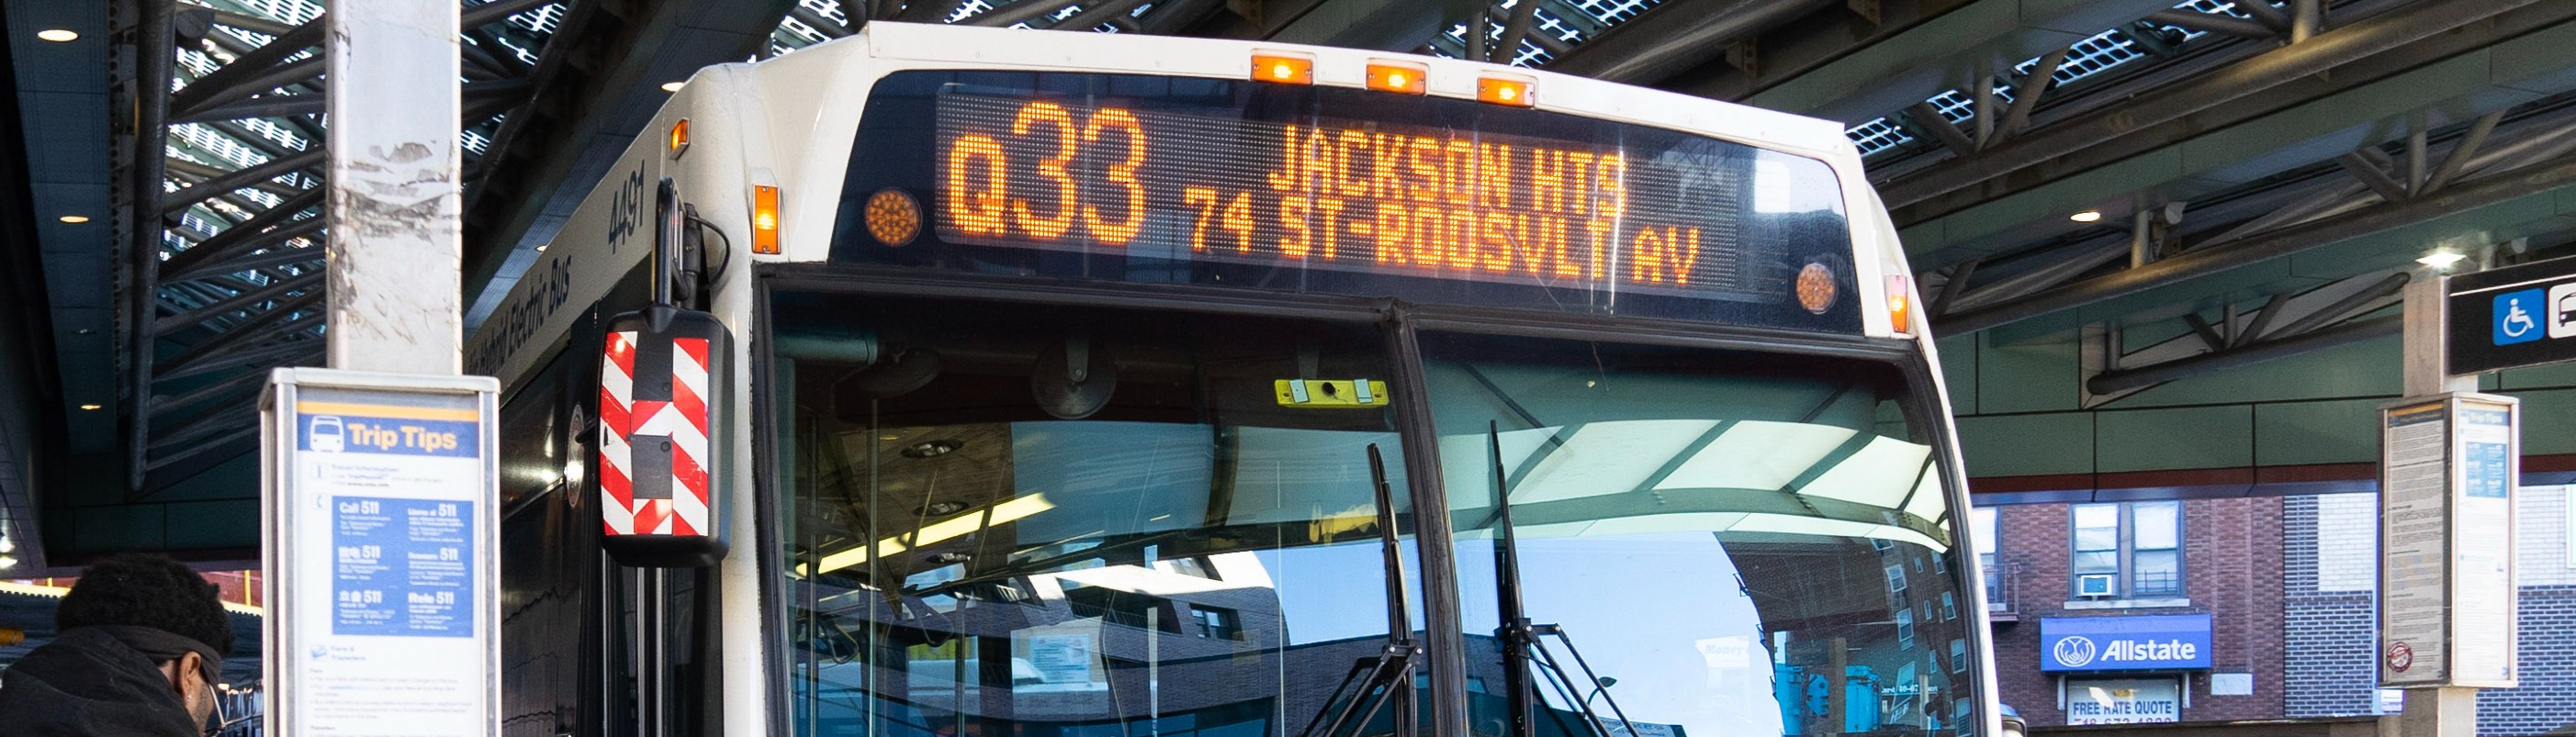 A bus with an electric screen at the top that reads Q53